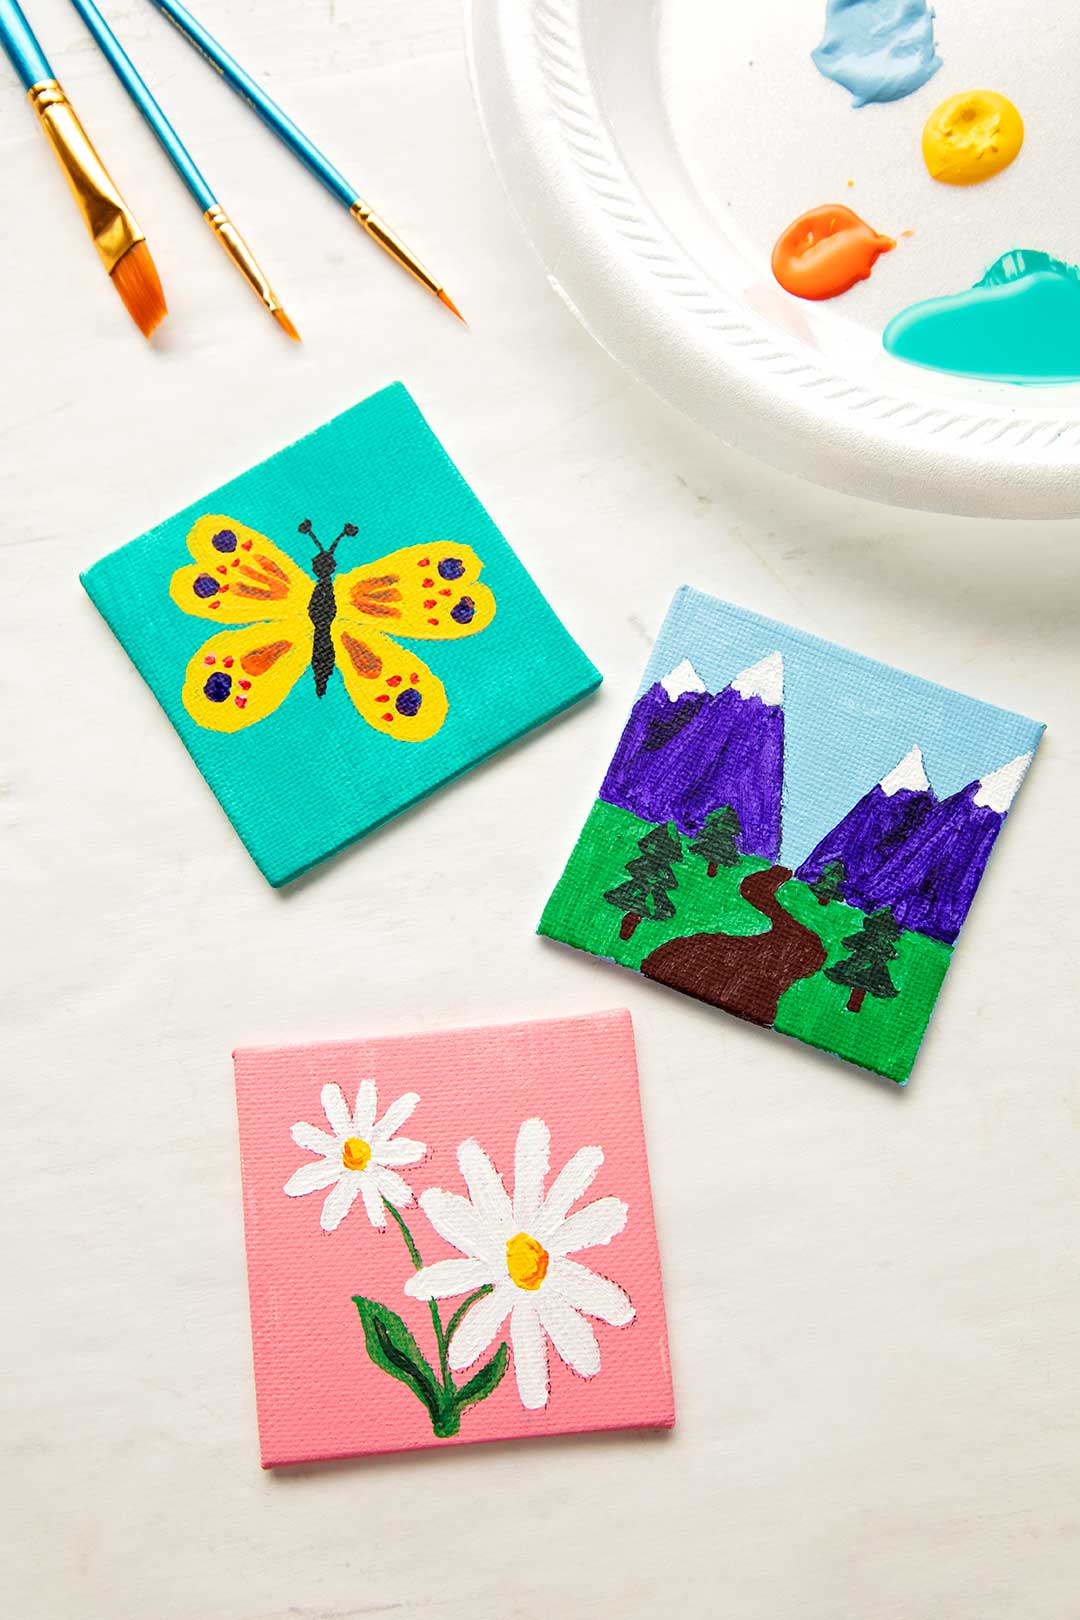 Finished painted mini canvases near three paintbrushes and a plate of paint colors.